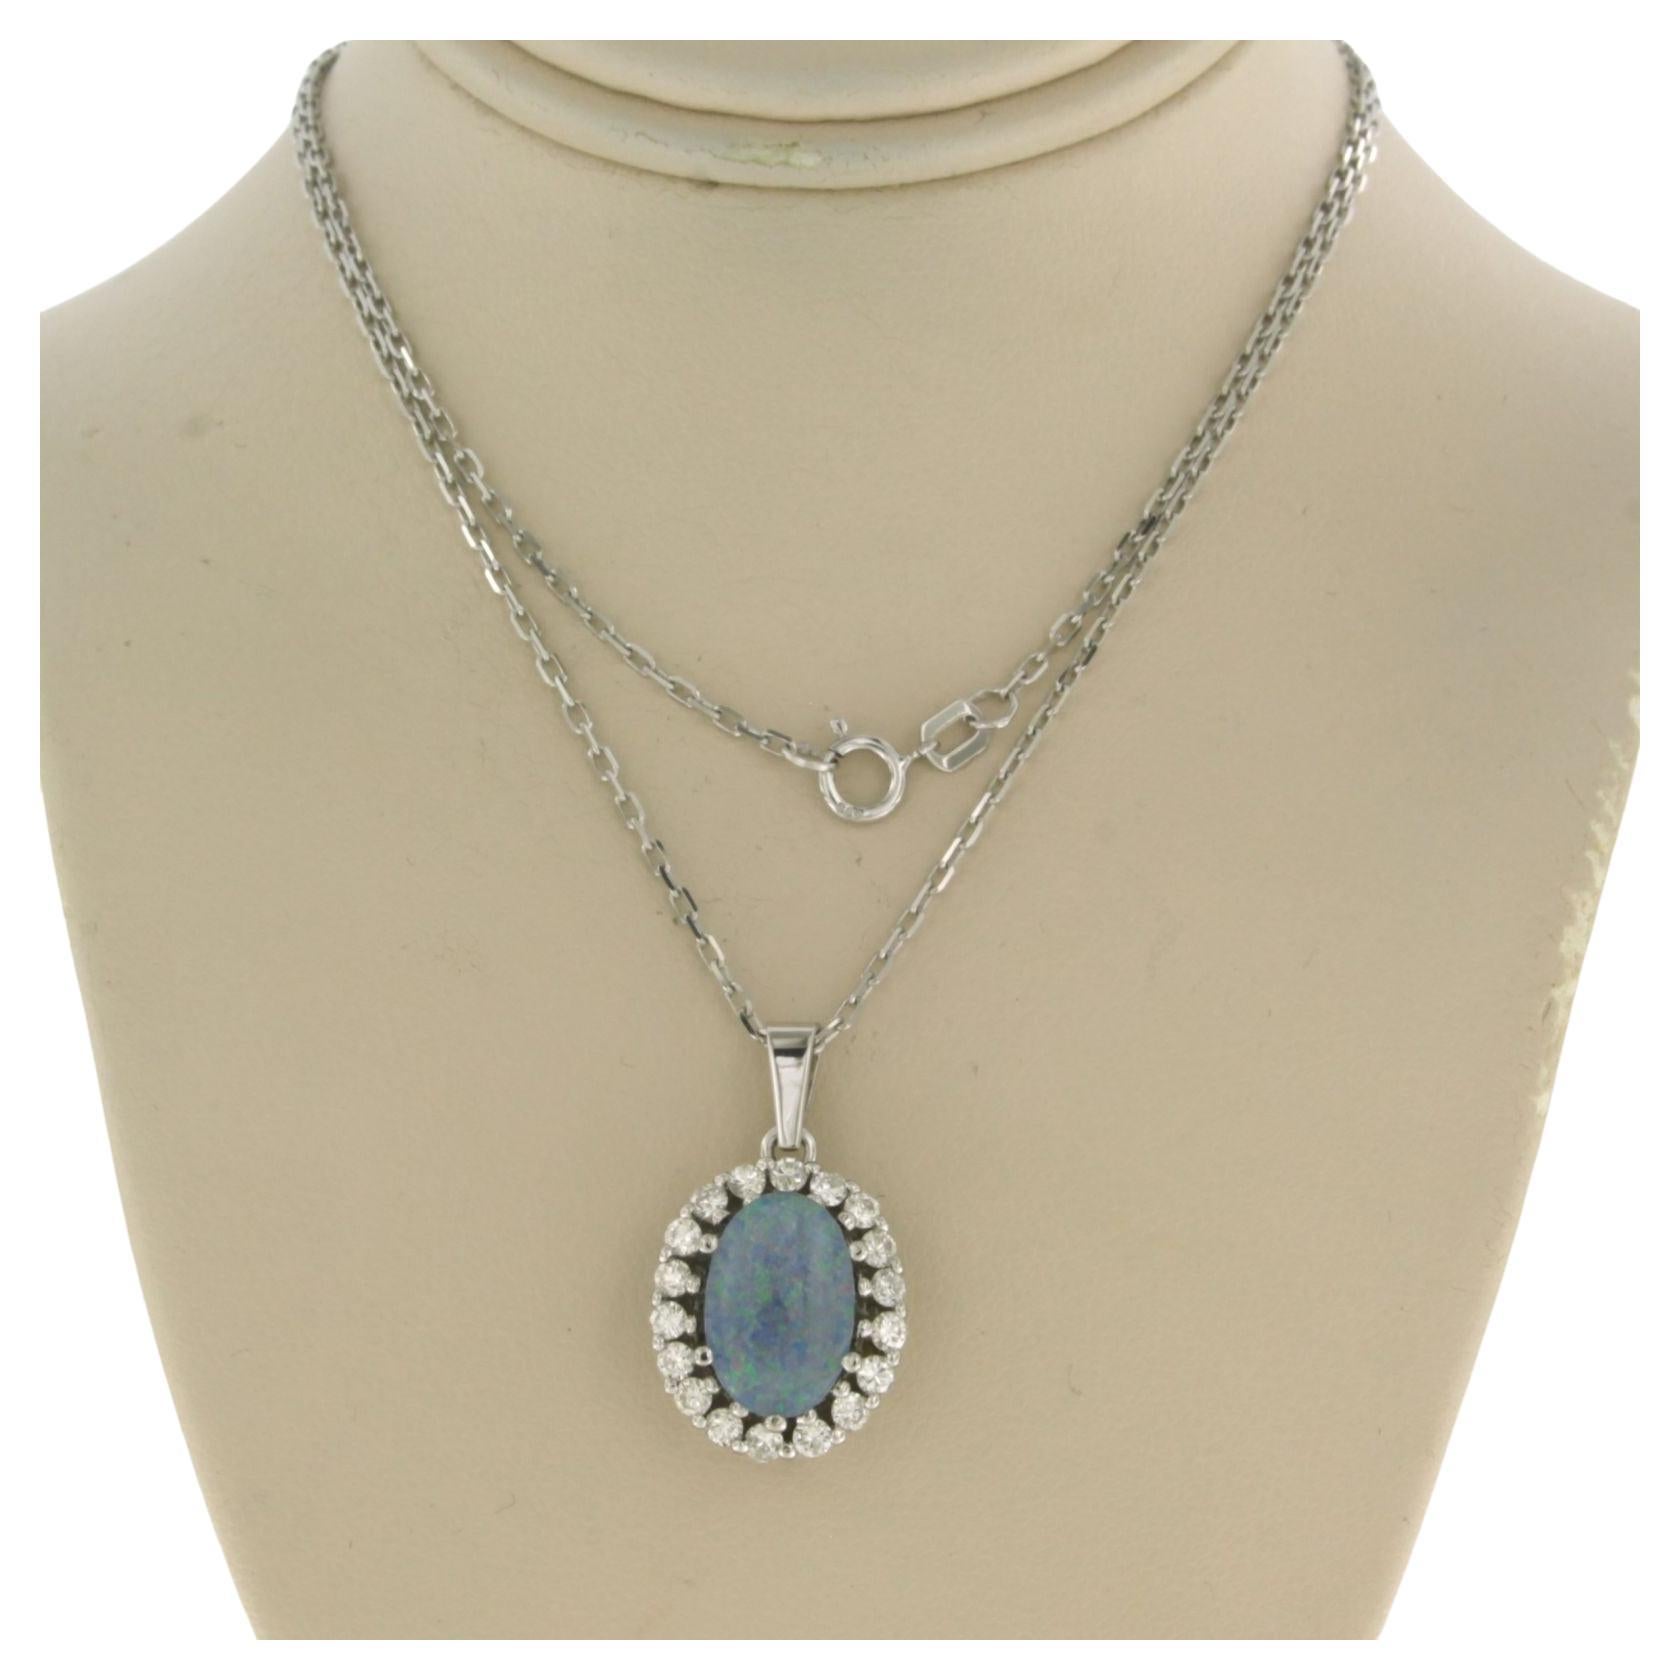 Necklace and pendant set with opal and diamond 14k white gold